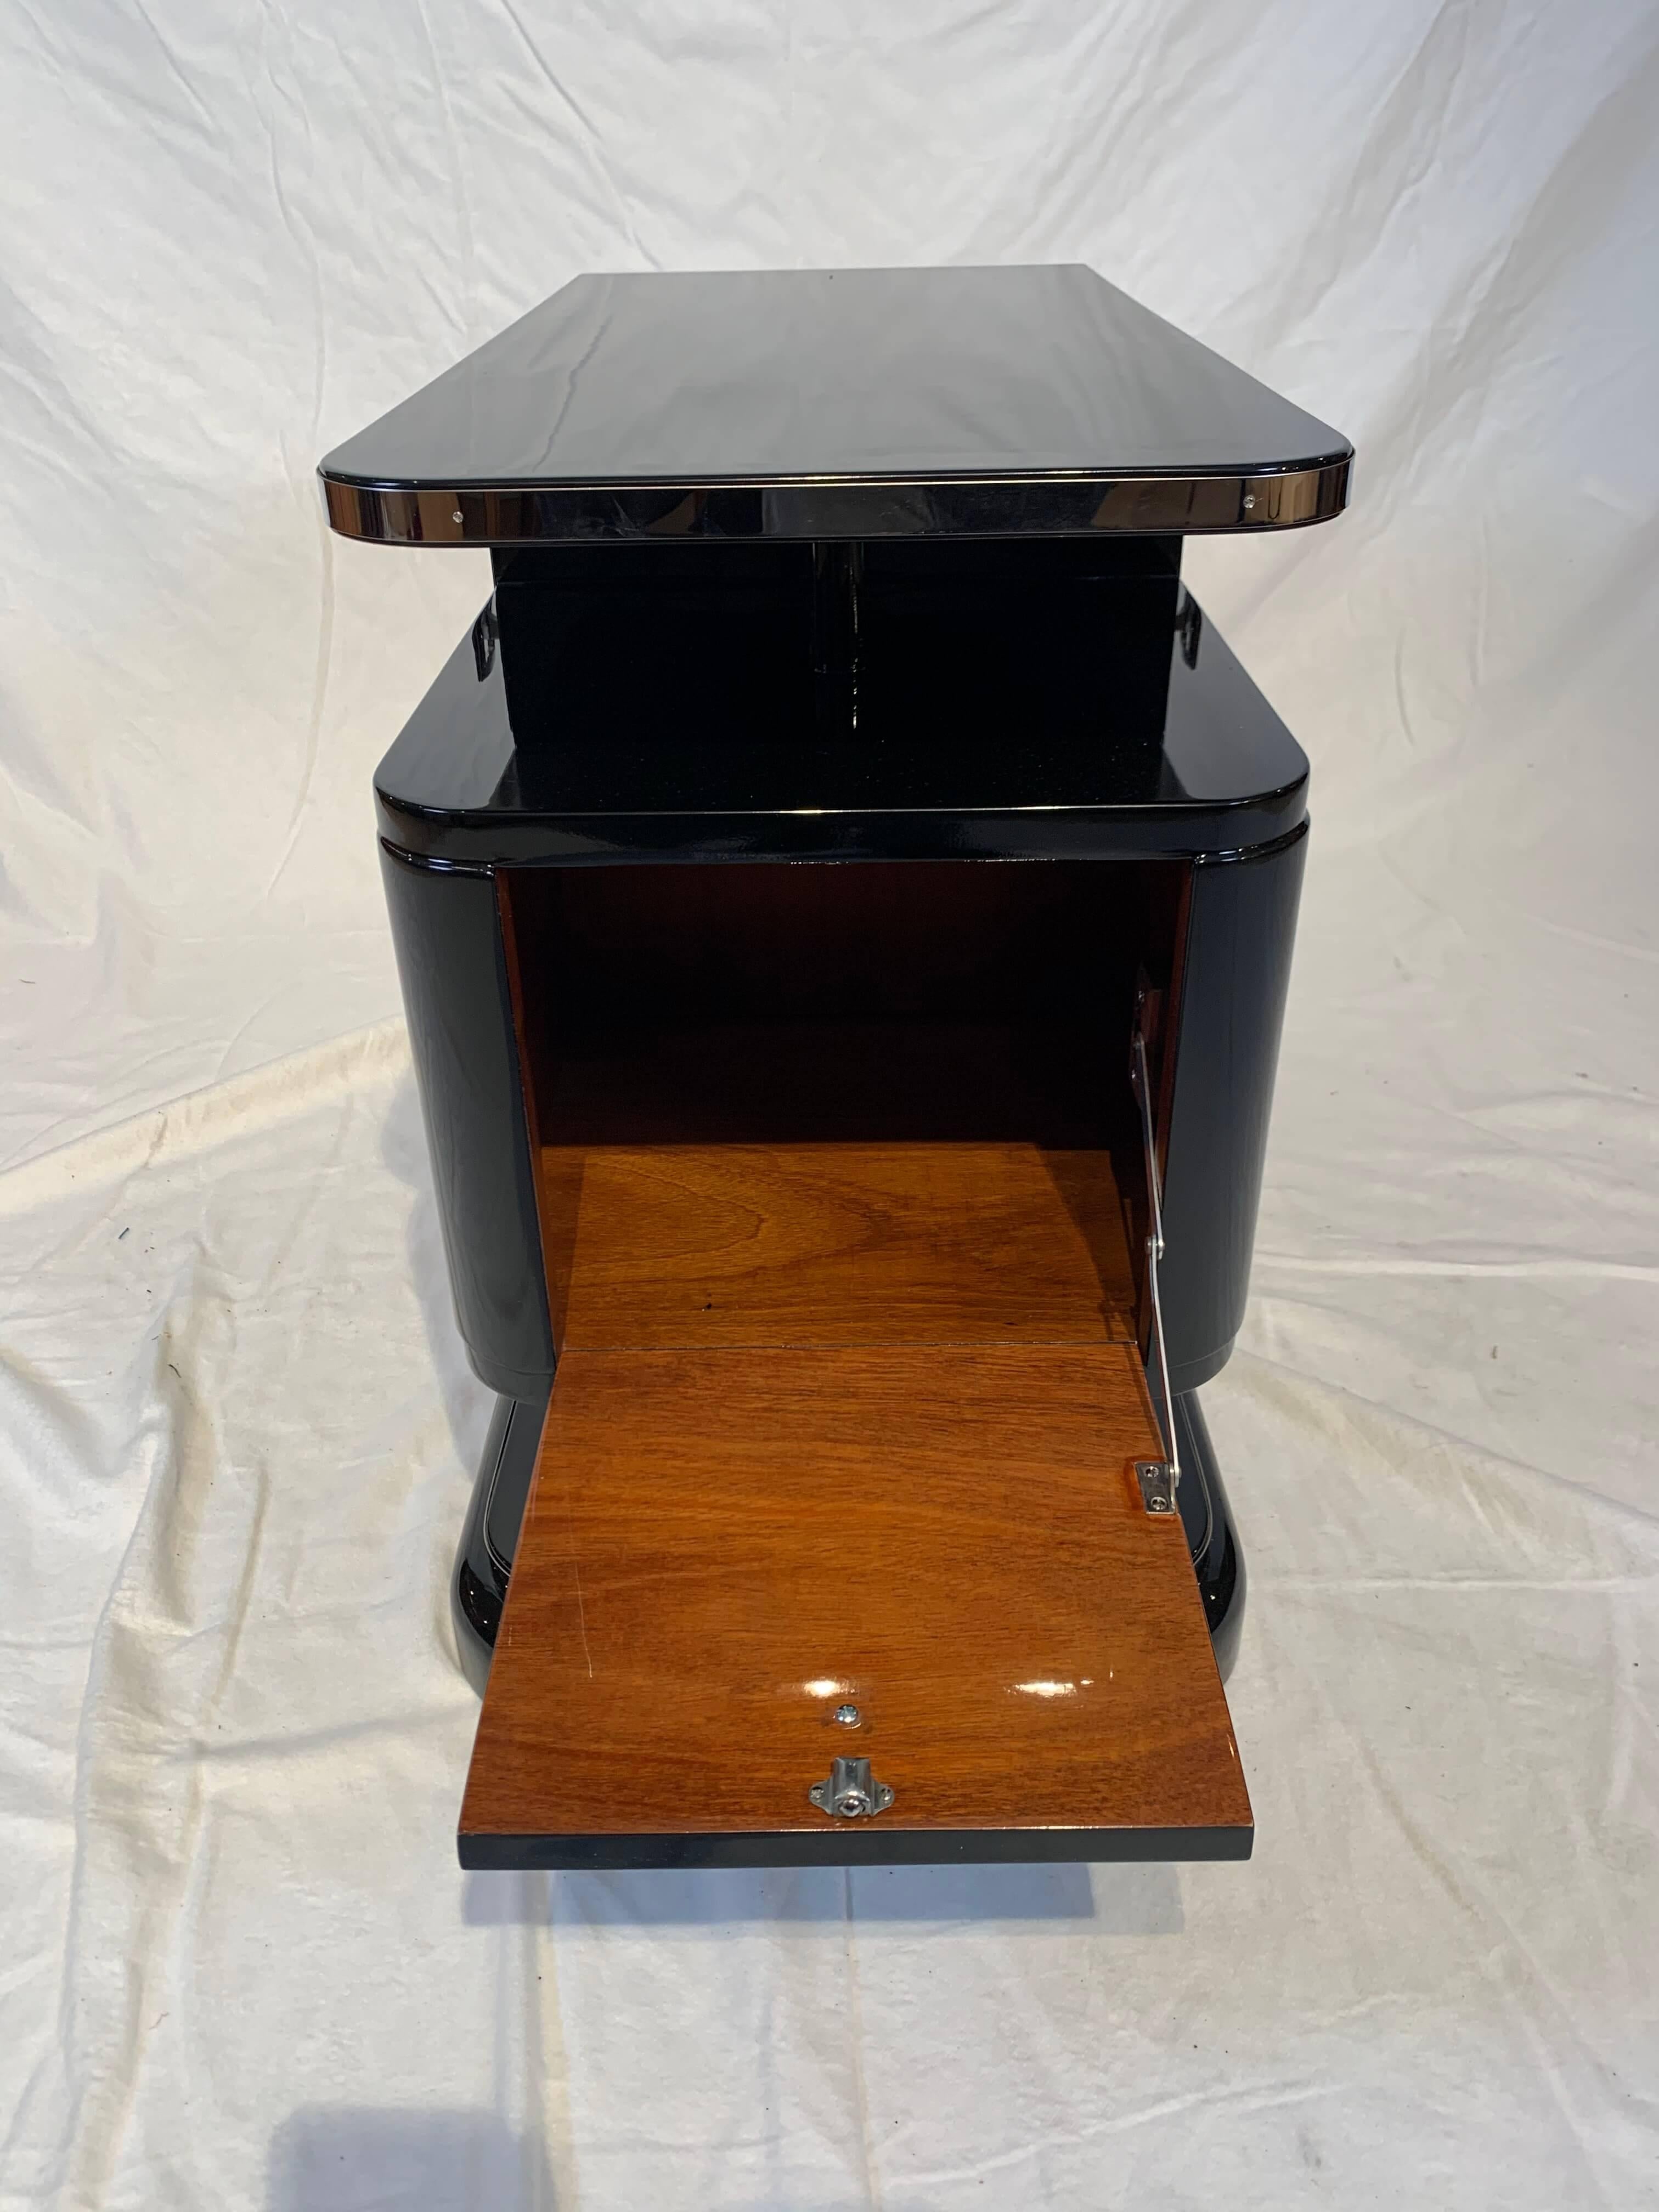 Stainless Steel Art Deco Small Furniture, Black Lacquer, Mahogany, Nickel, France, circa 1930